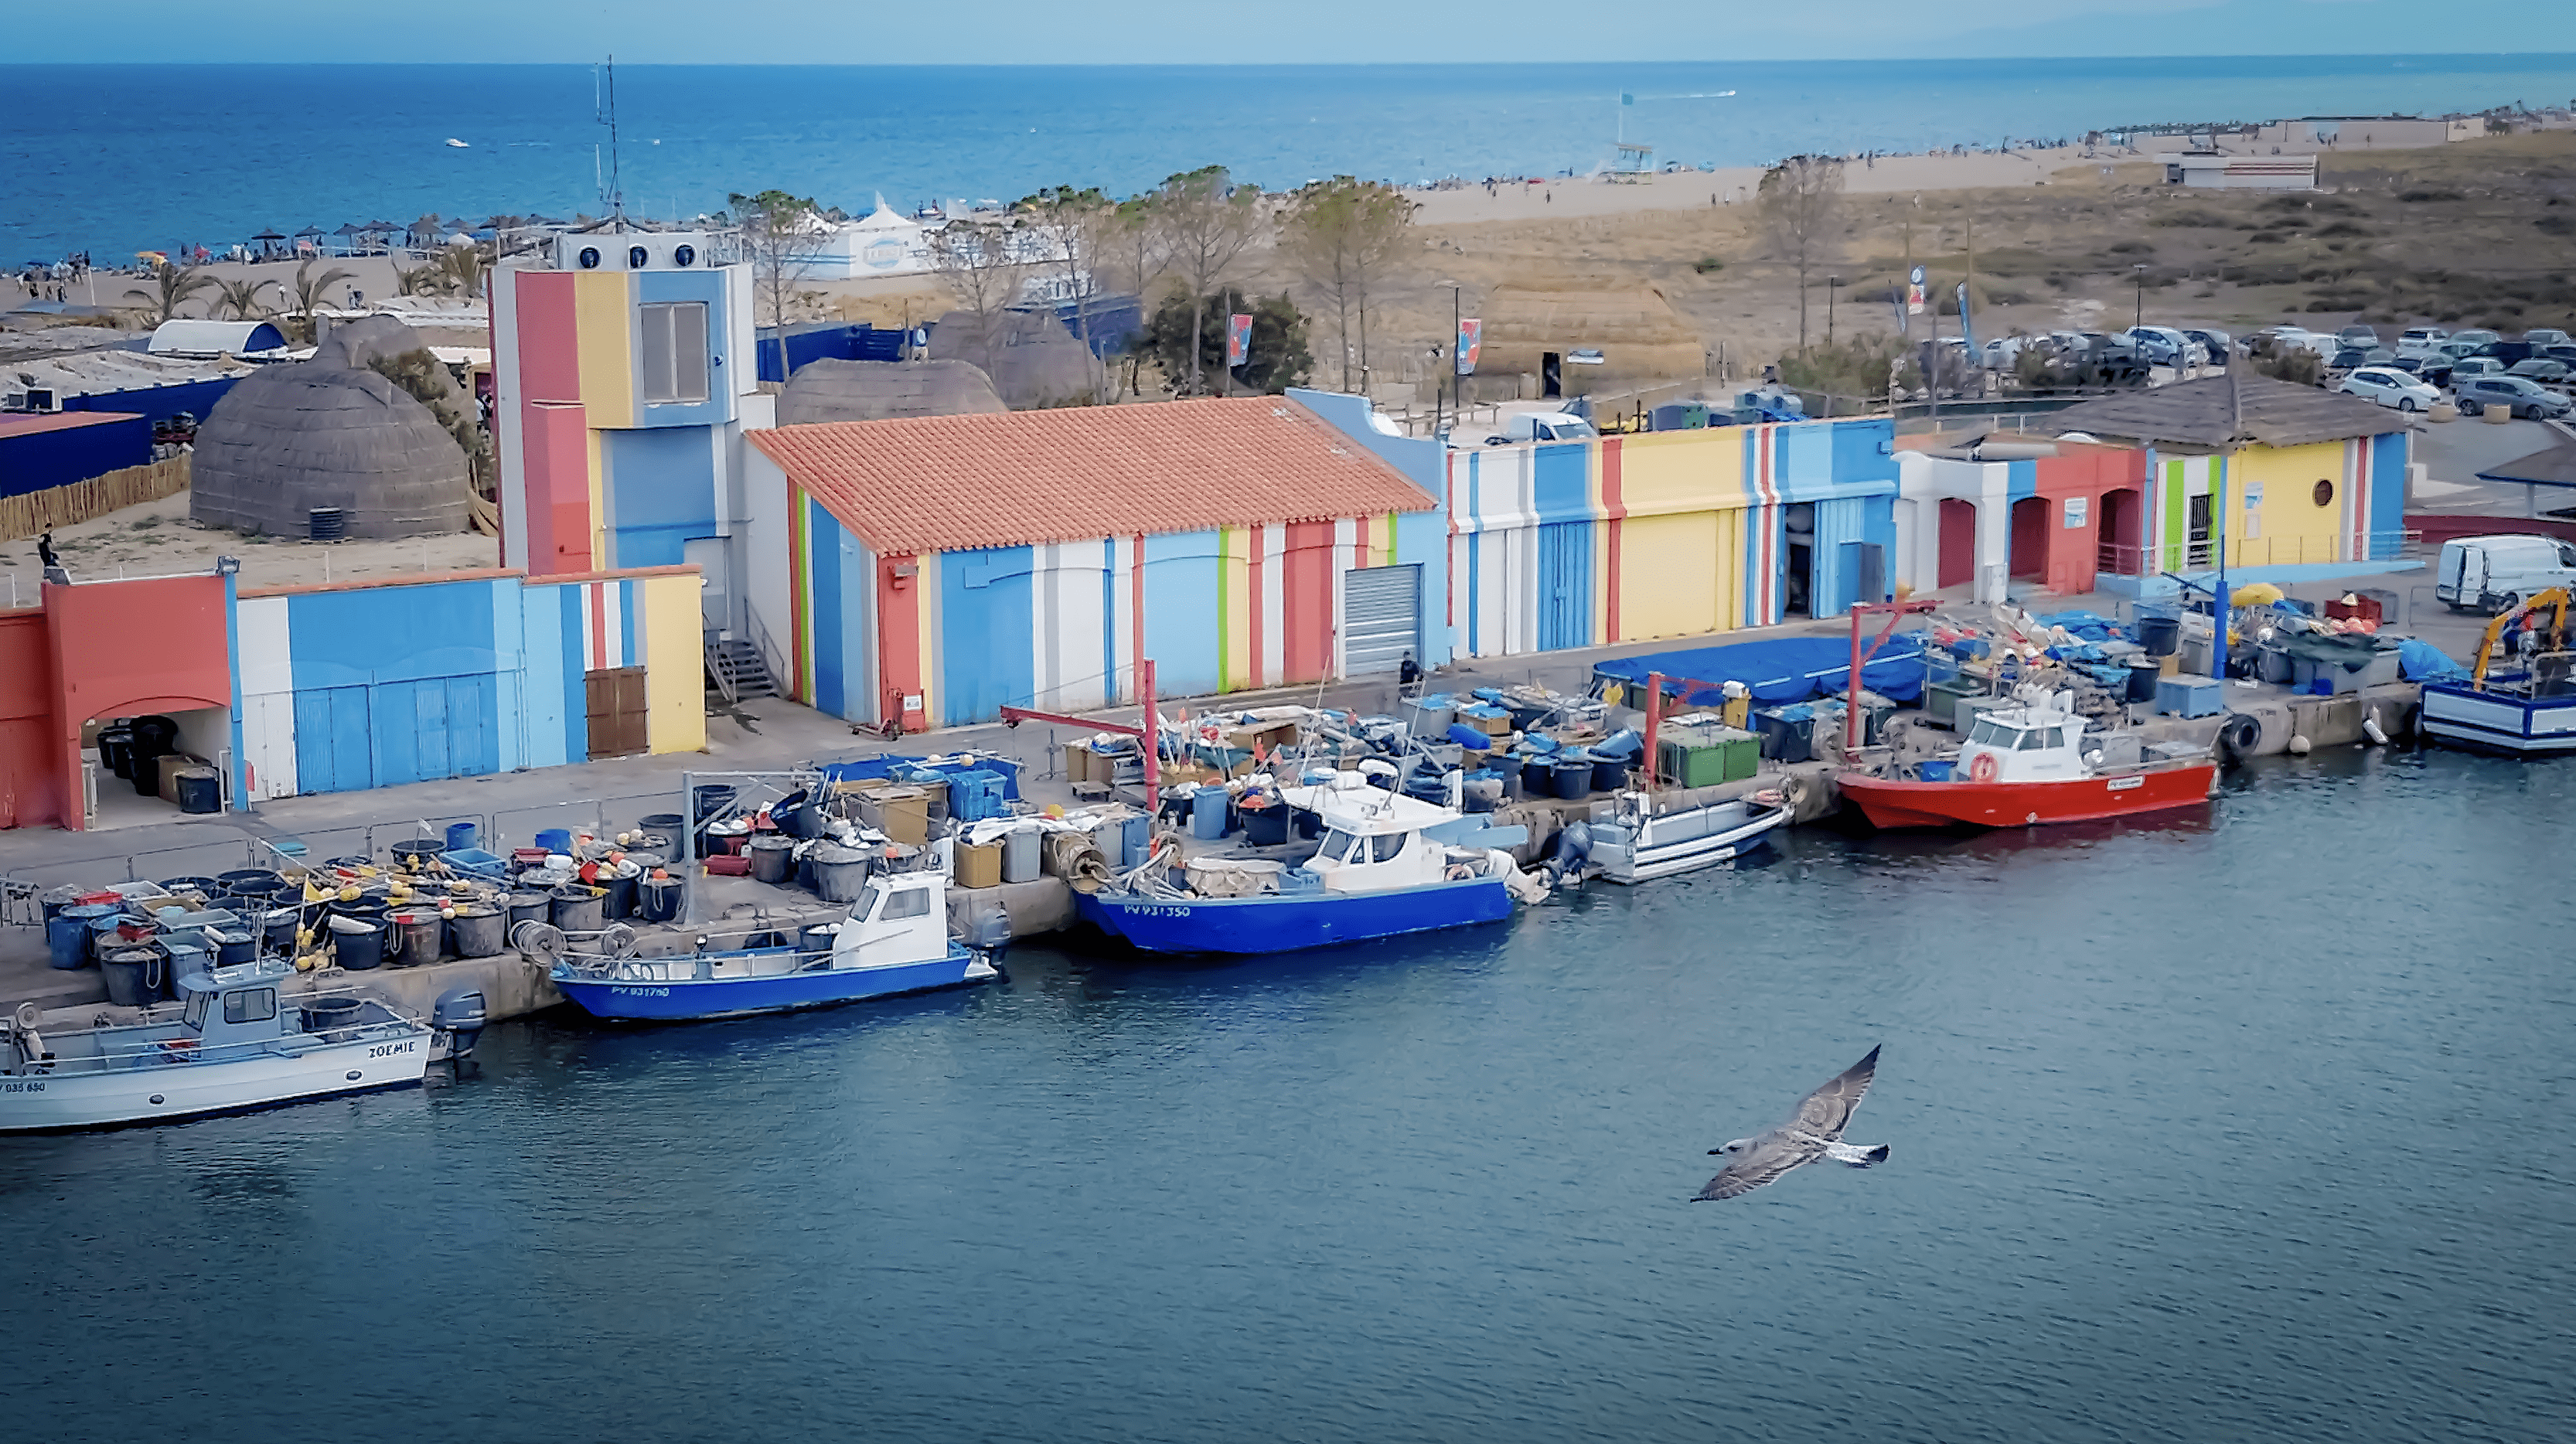 The historic fishing village of Le Barcarès and the fishing port